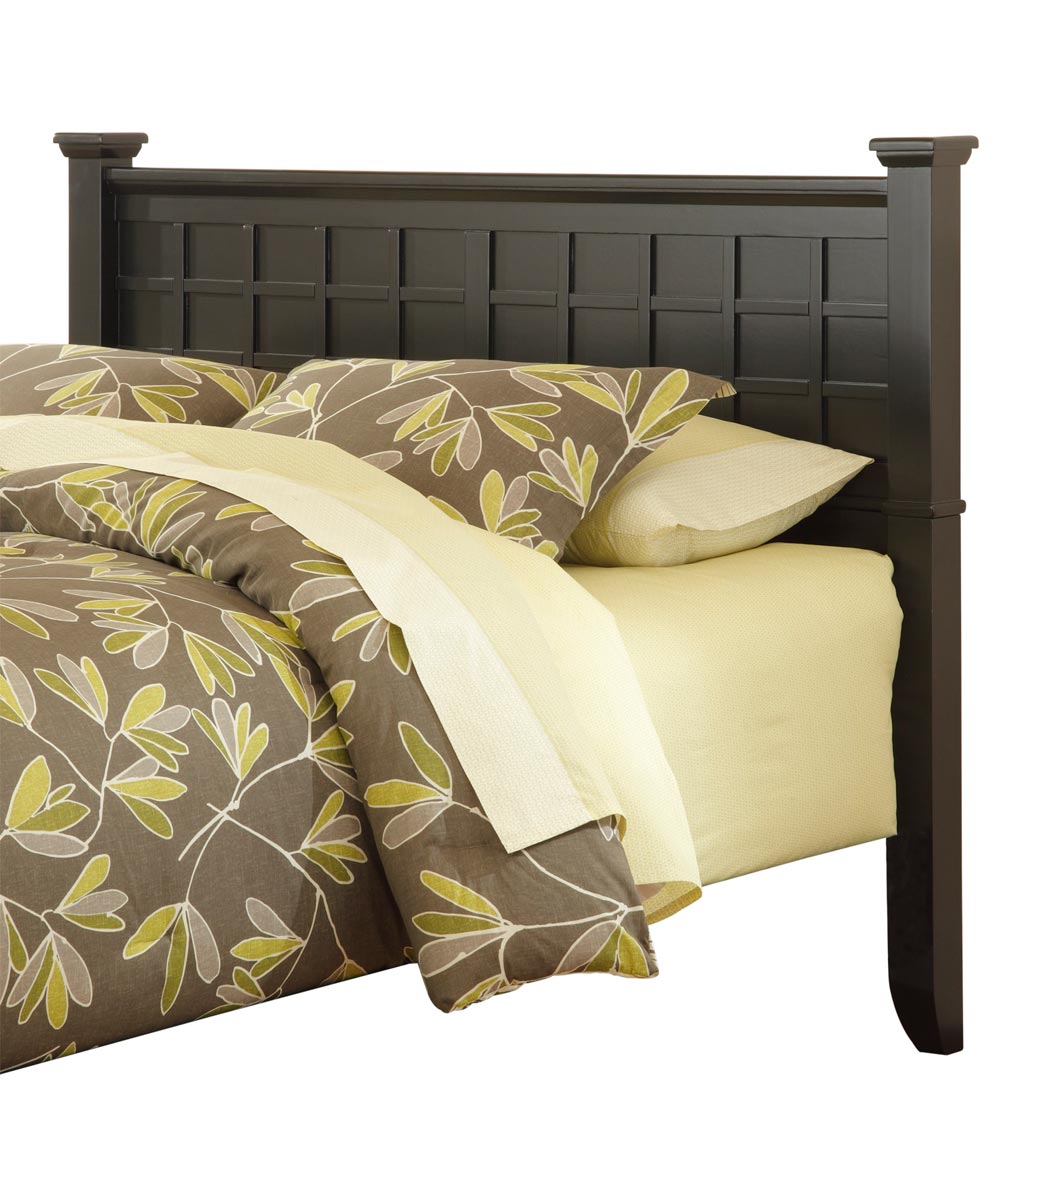 Home Styles Arts and Crafts Queen Headboard - Black